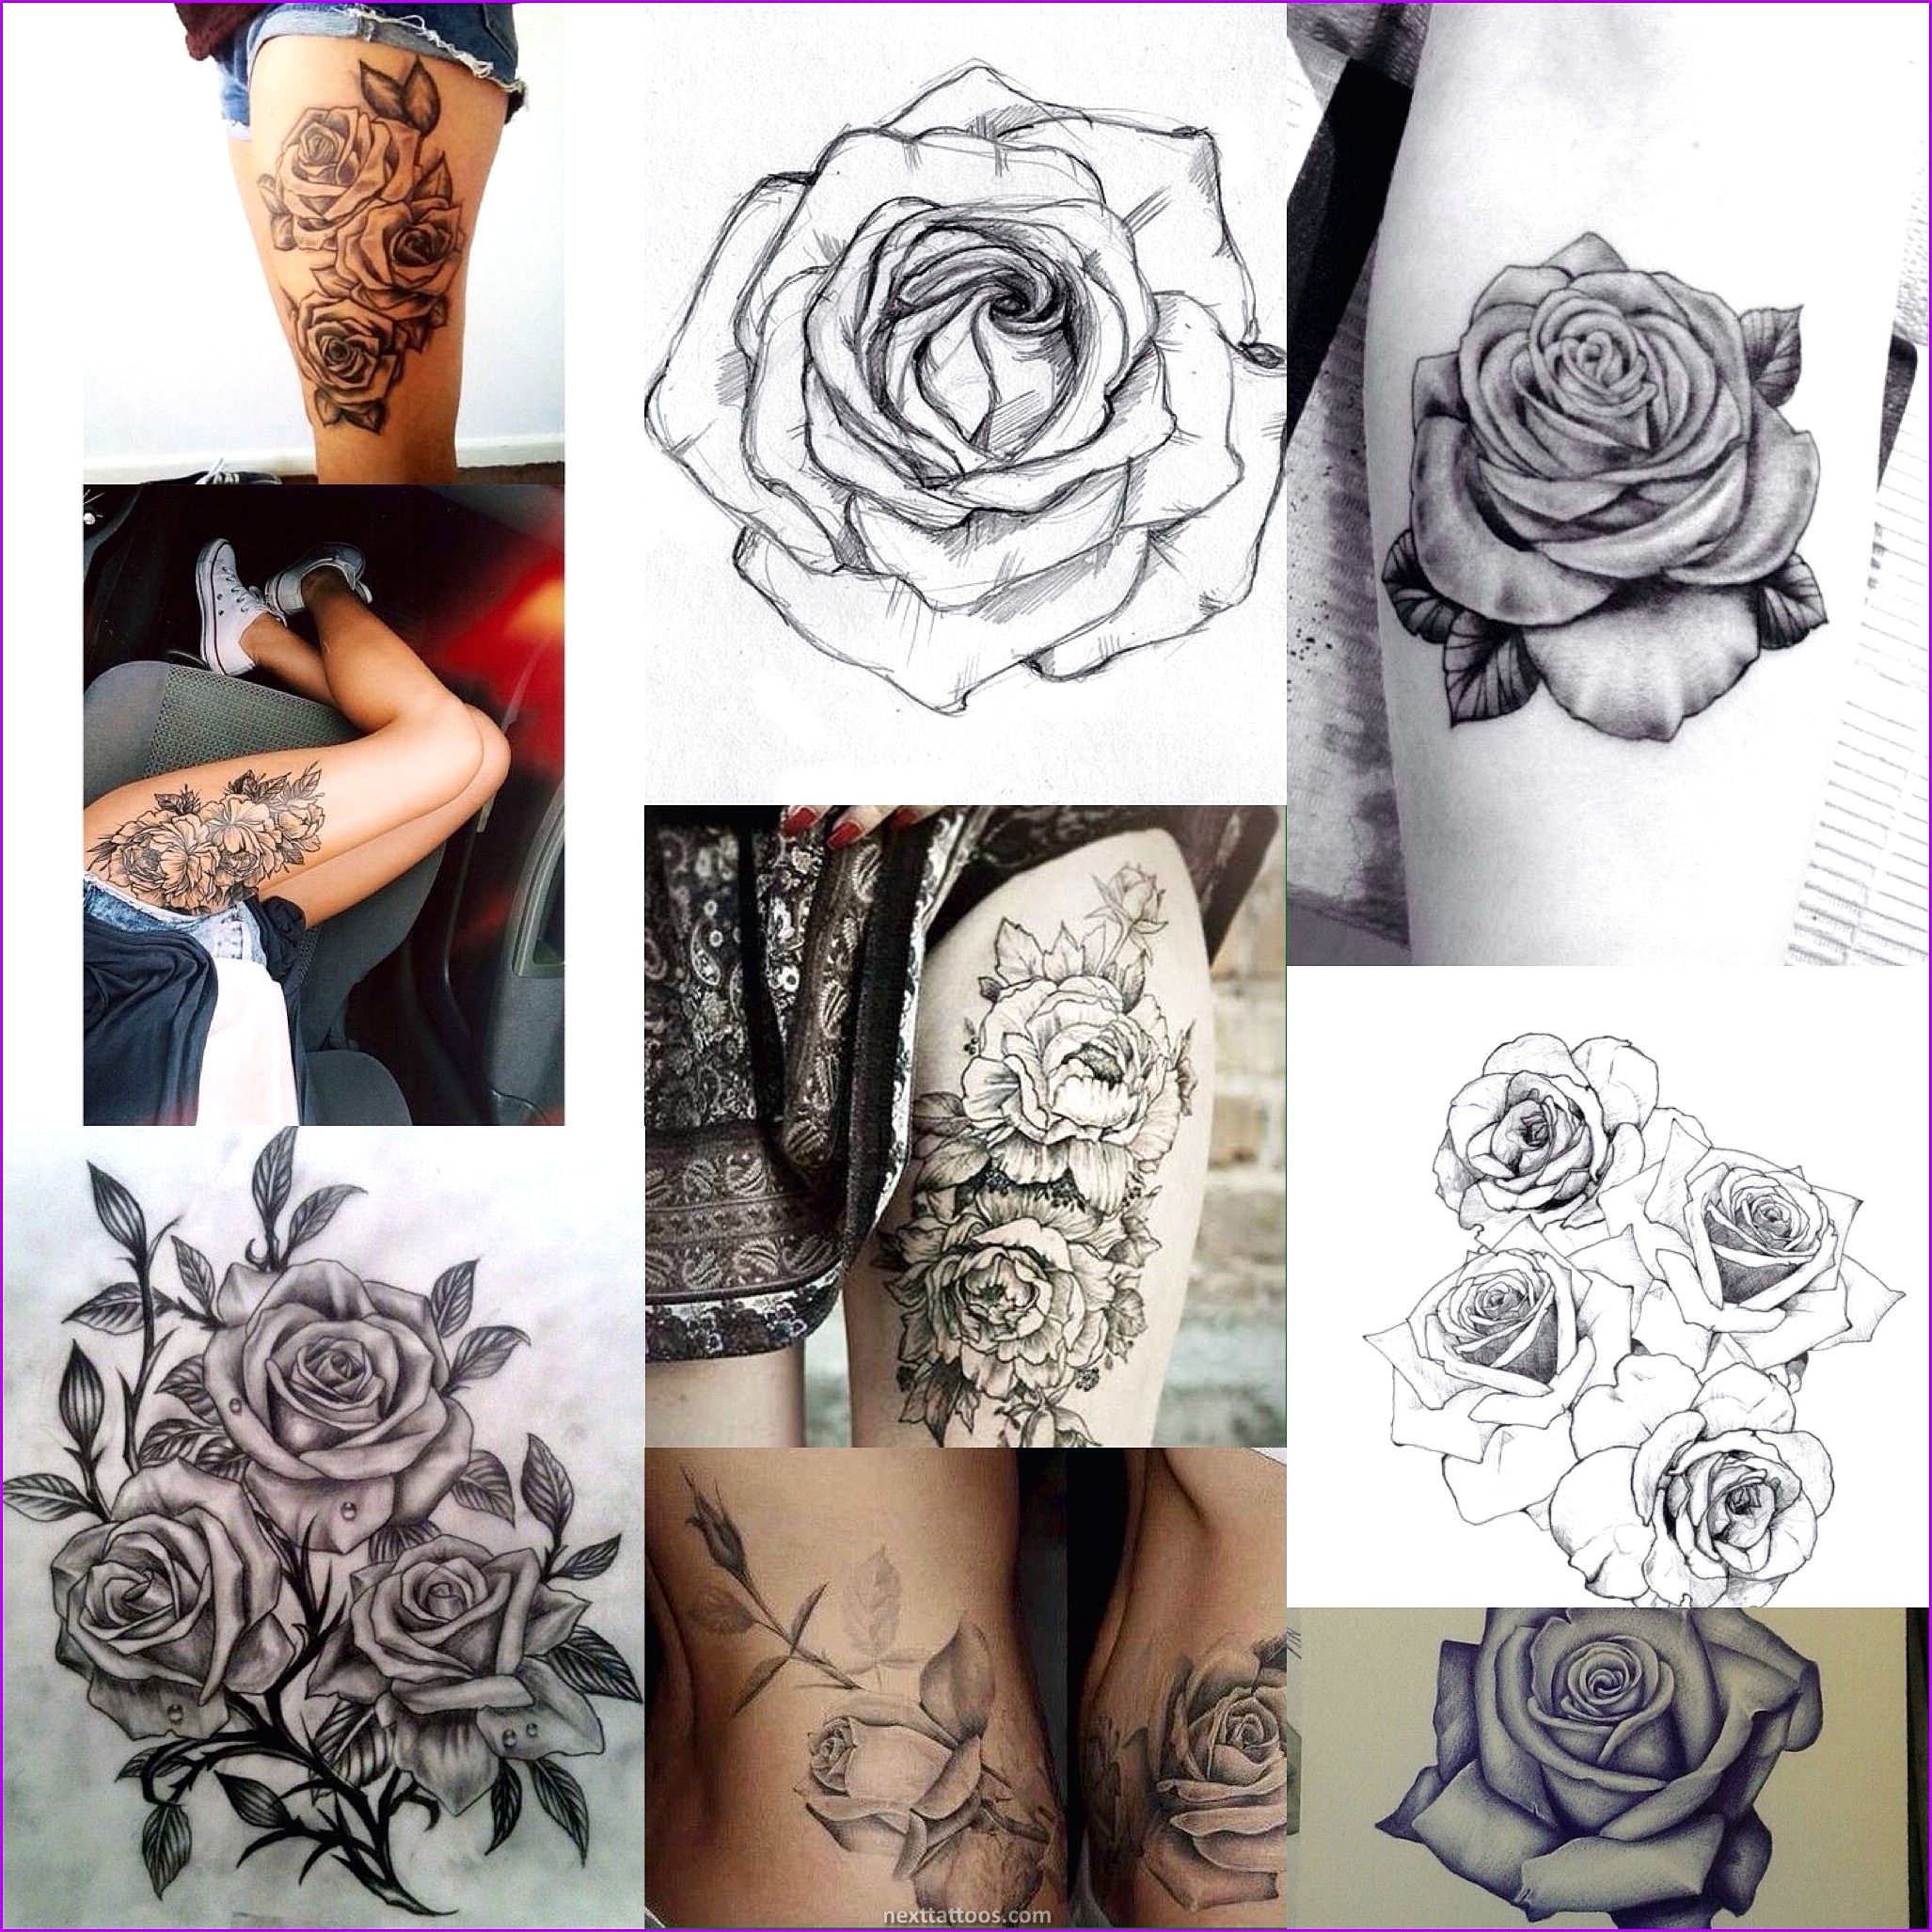 My Next Tattoo Ideas - How to Choose My Next Tattoo Design in Spanish